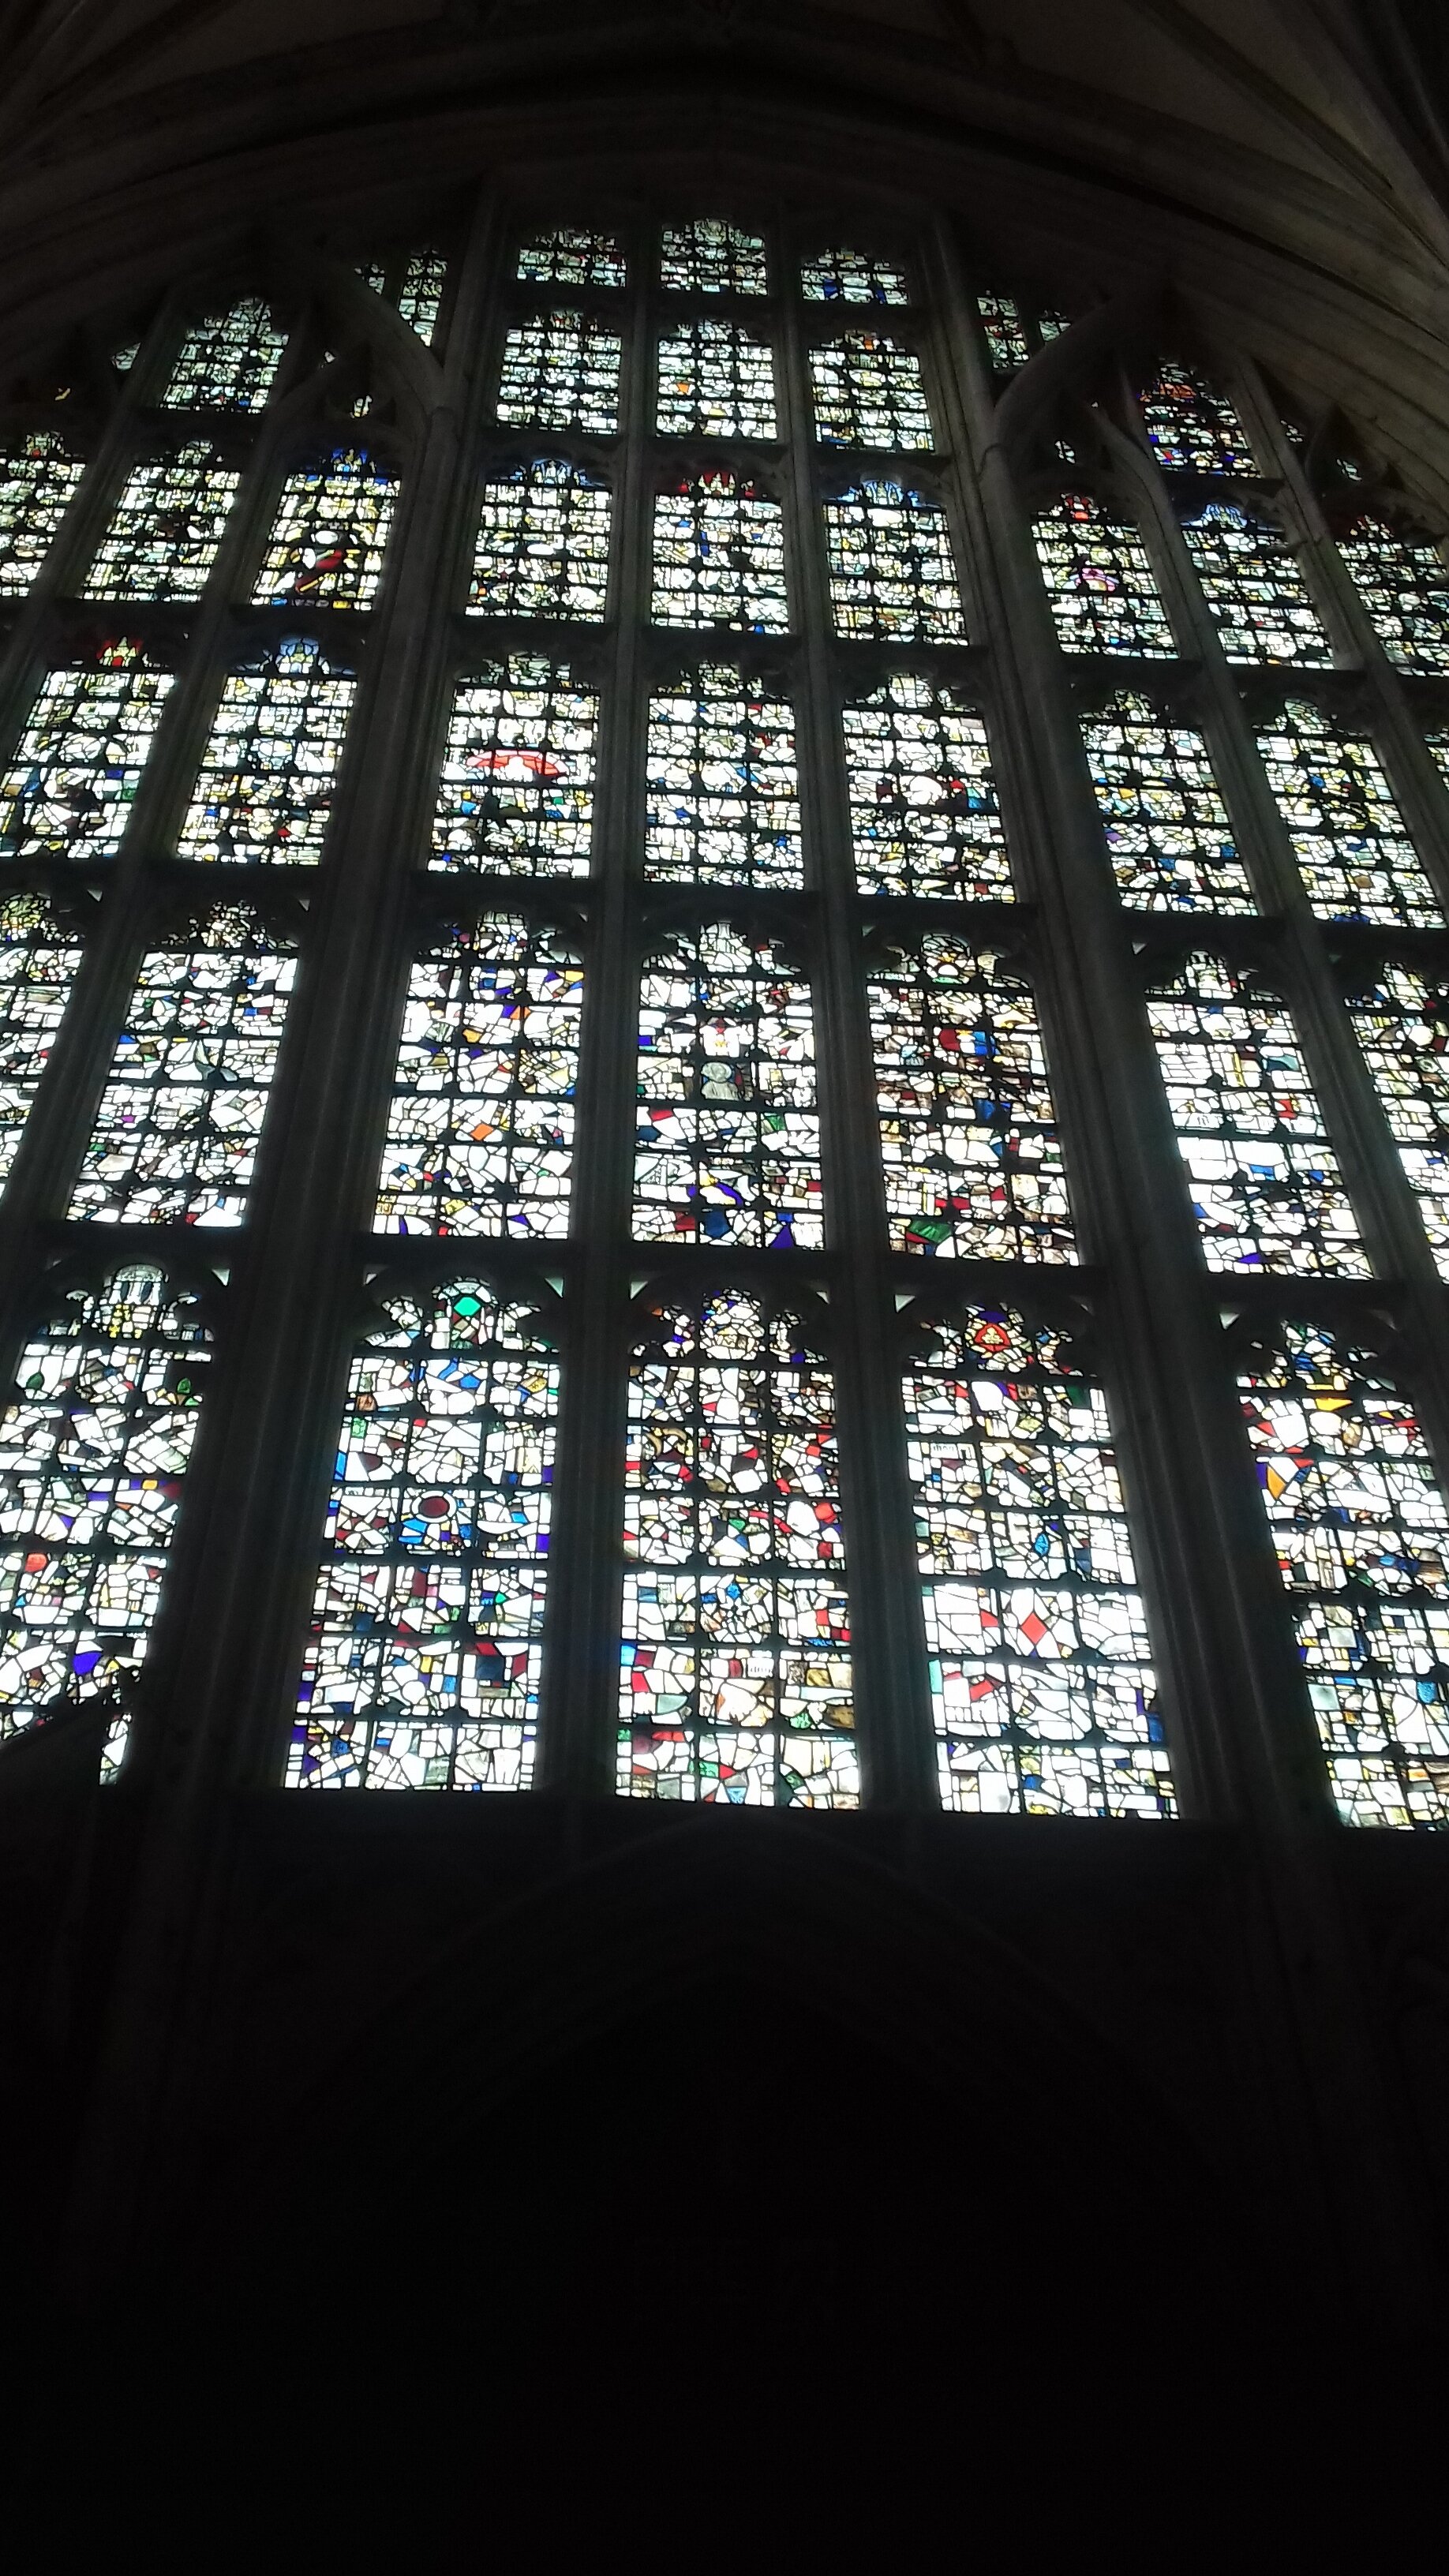  The windows in Winchester Cathedral 